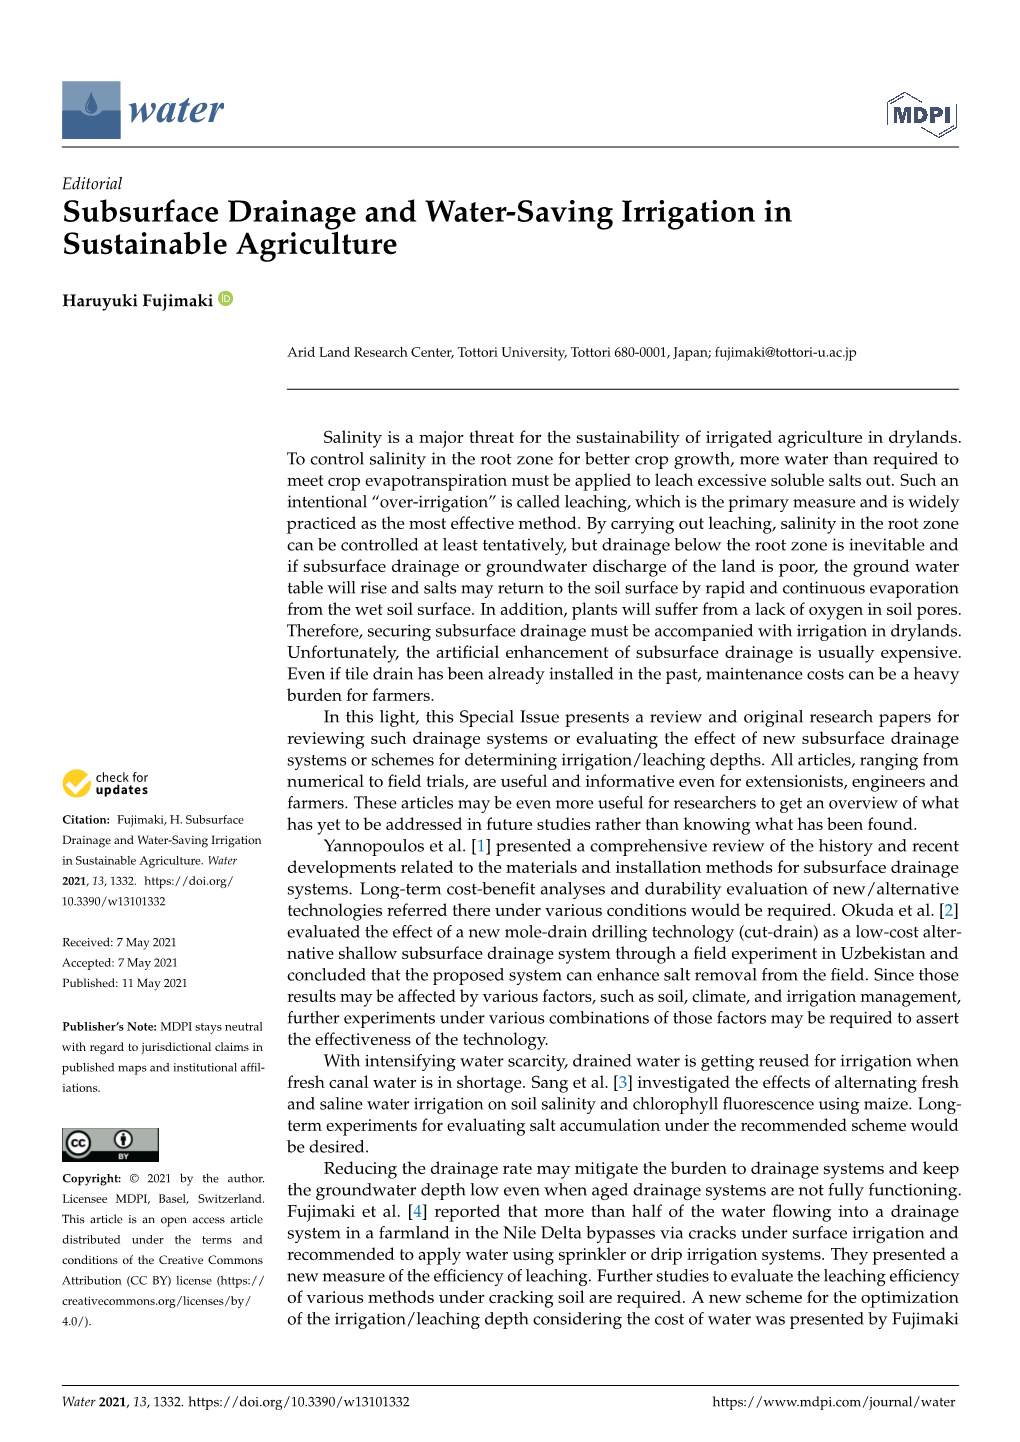 Subsurface Drainage and Water-Saving Irrigation in Sustainable Agriculture